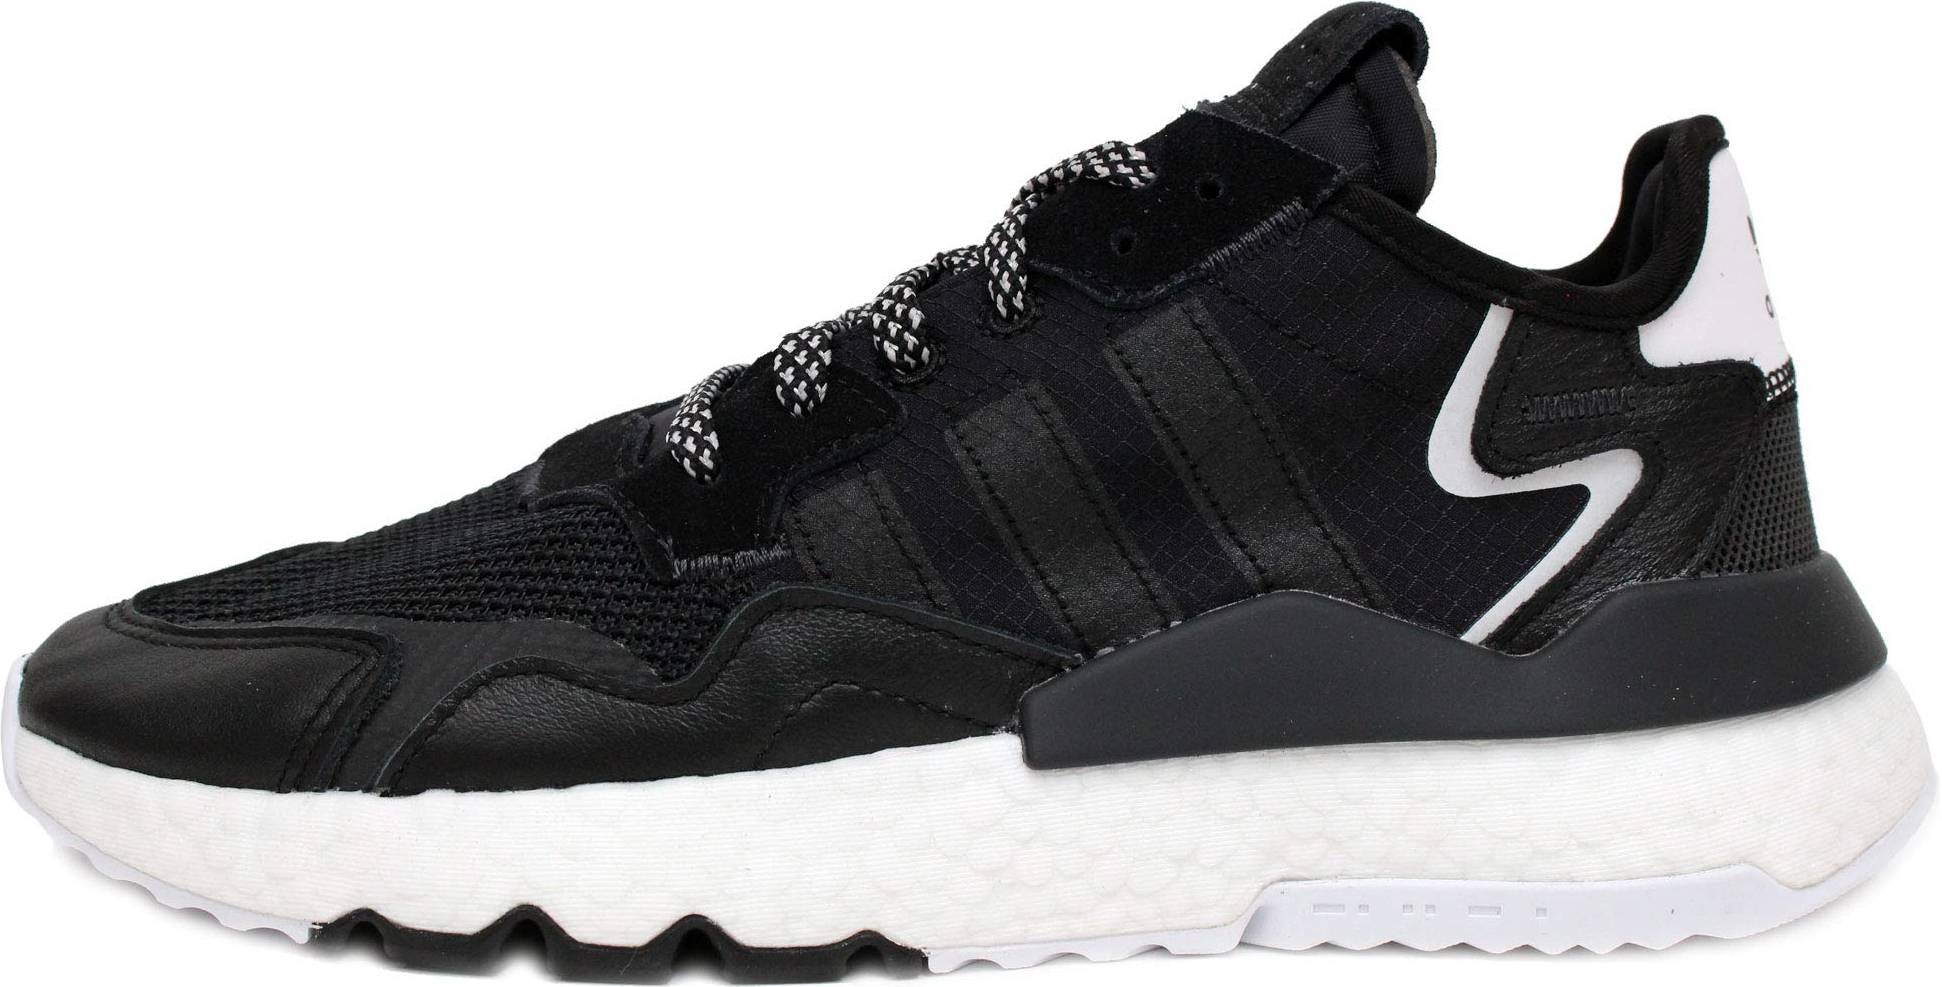 Only £40 + Review of Adidas Nite Jogger 